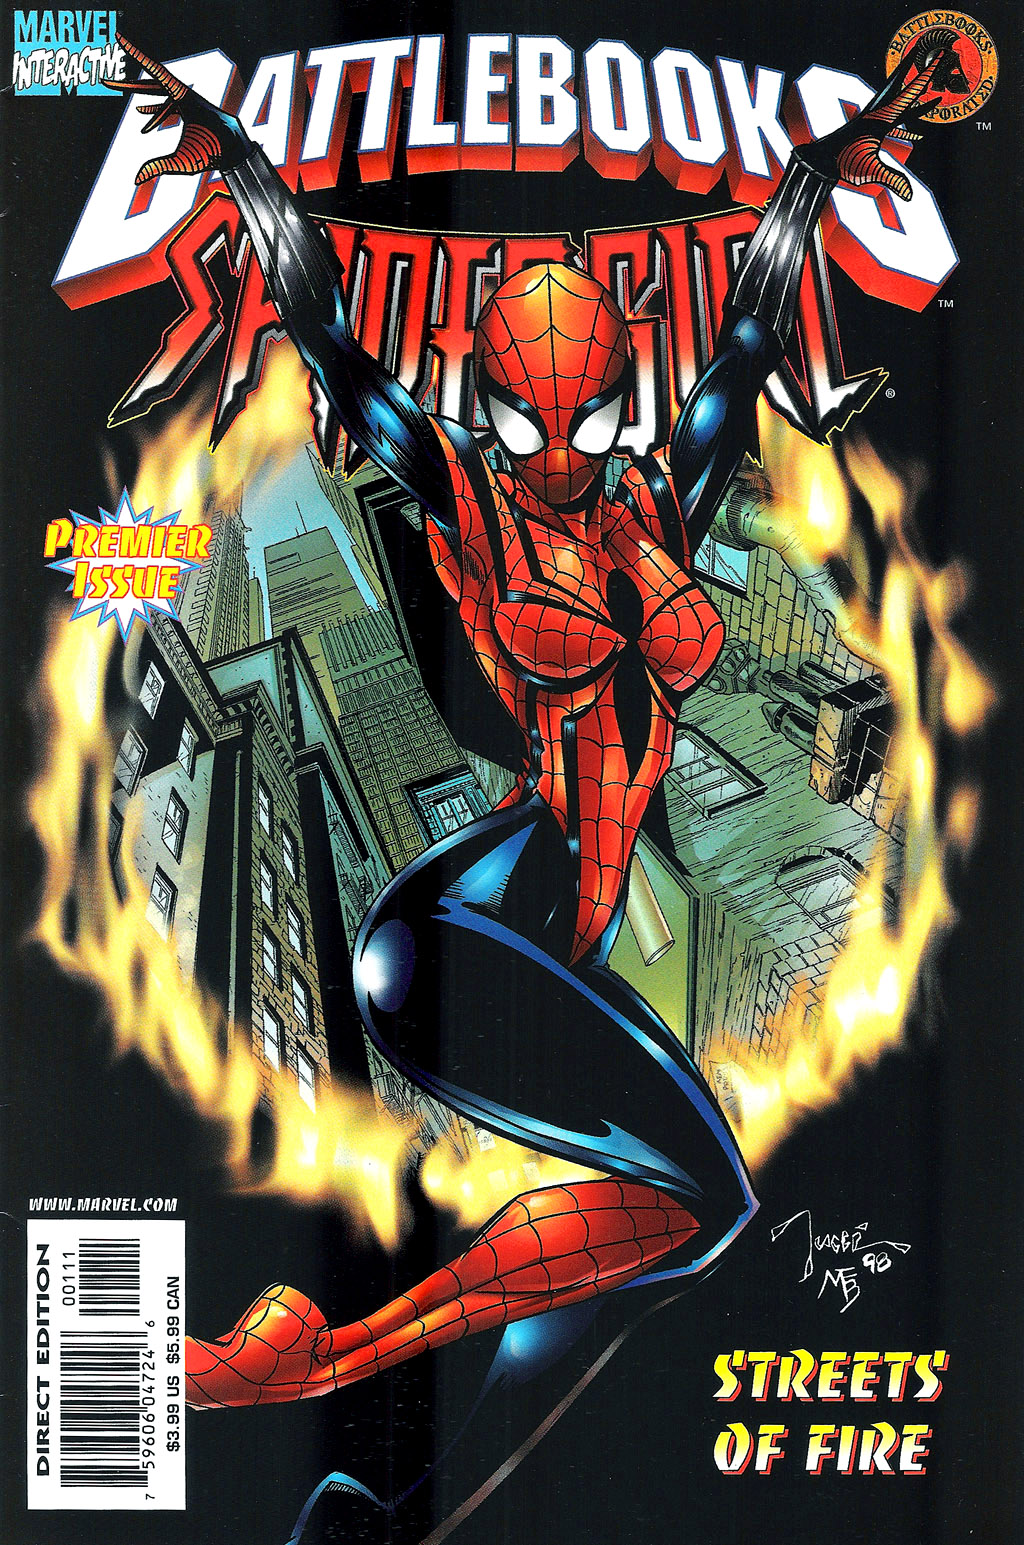 Read online Spider-Girl Battlebook: Streets of Fire comic -  Issue # Full - 1